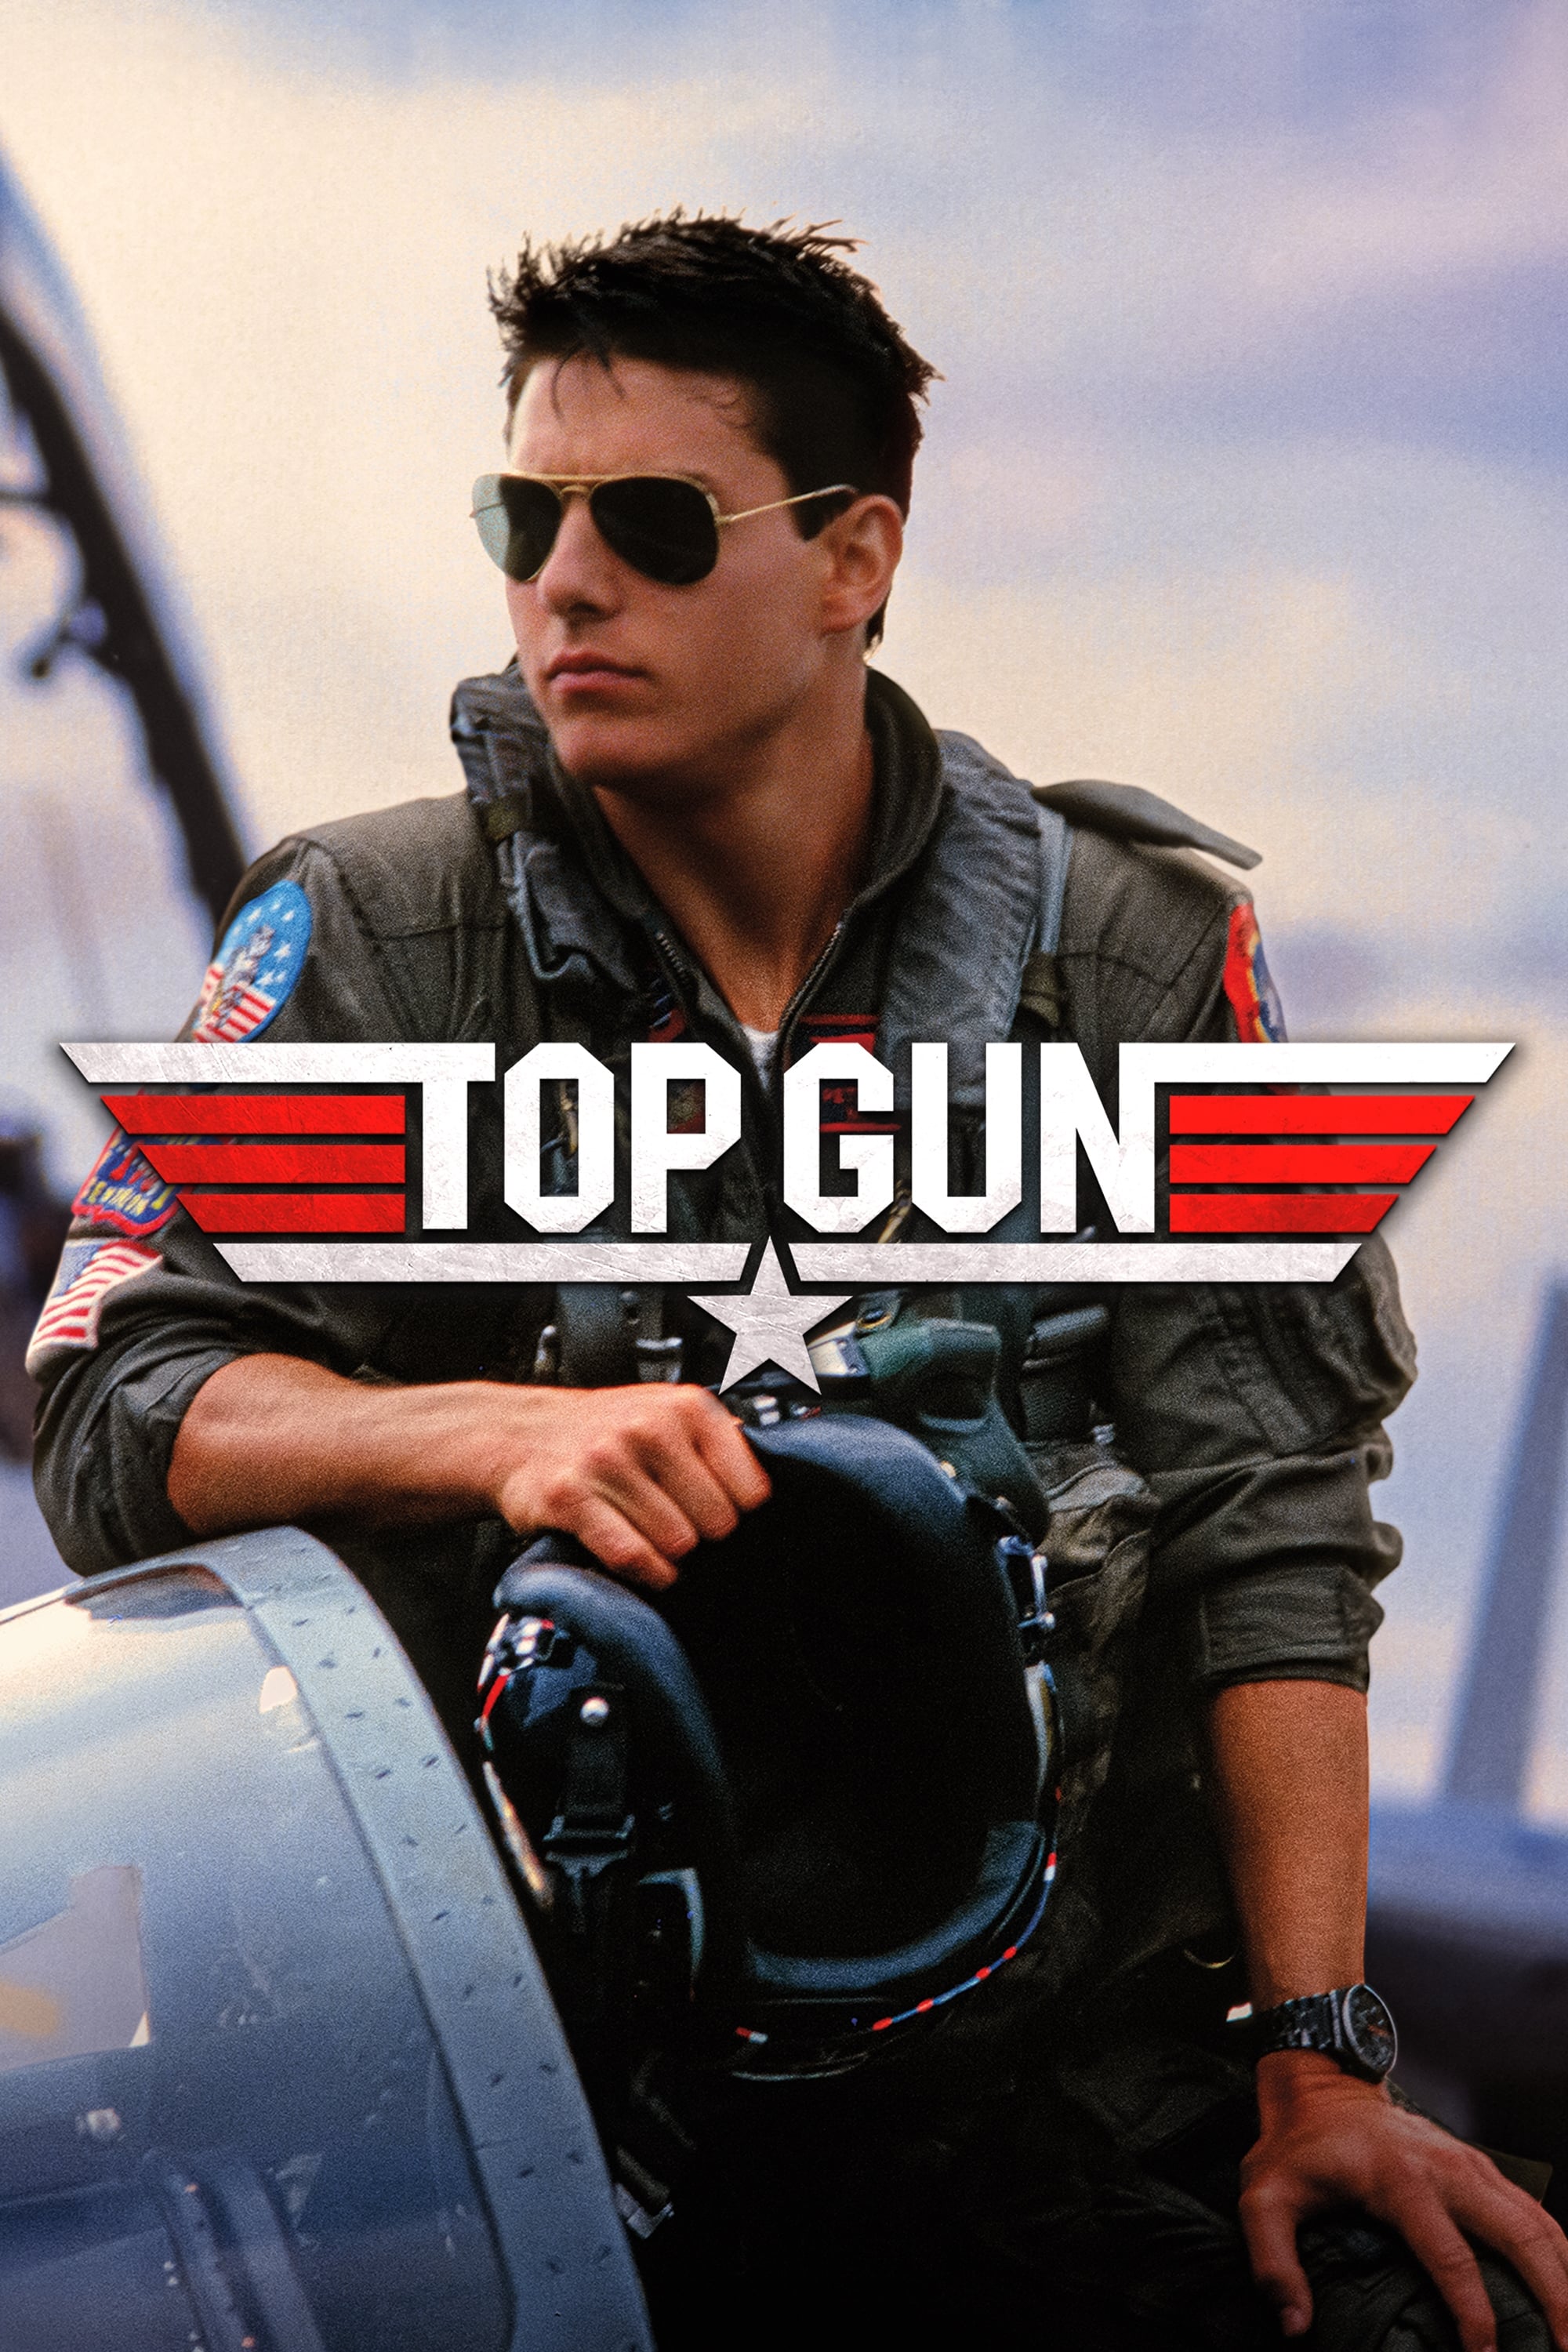 Top Gun Top Gun Is A 1986 American Action Drama Film Directed By Tony